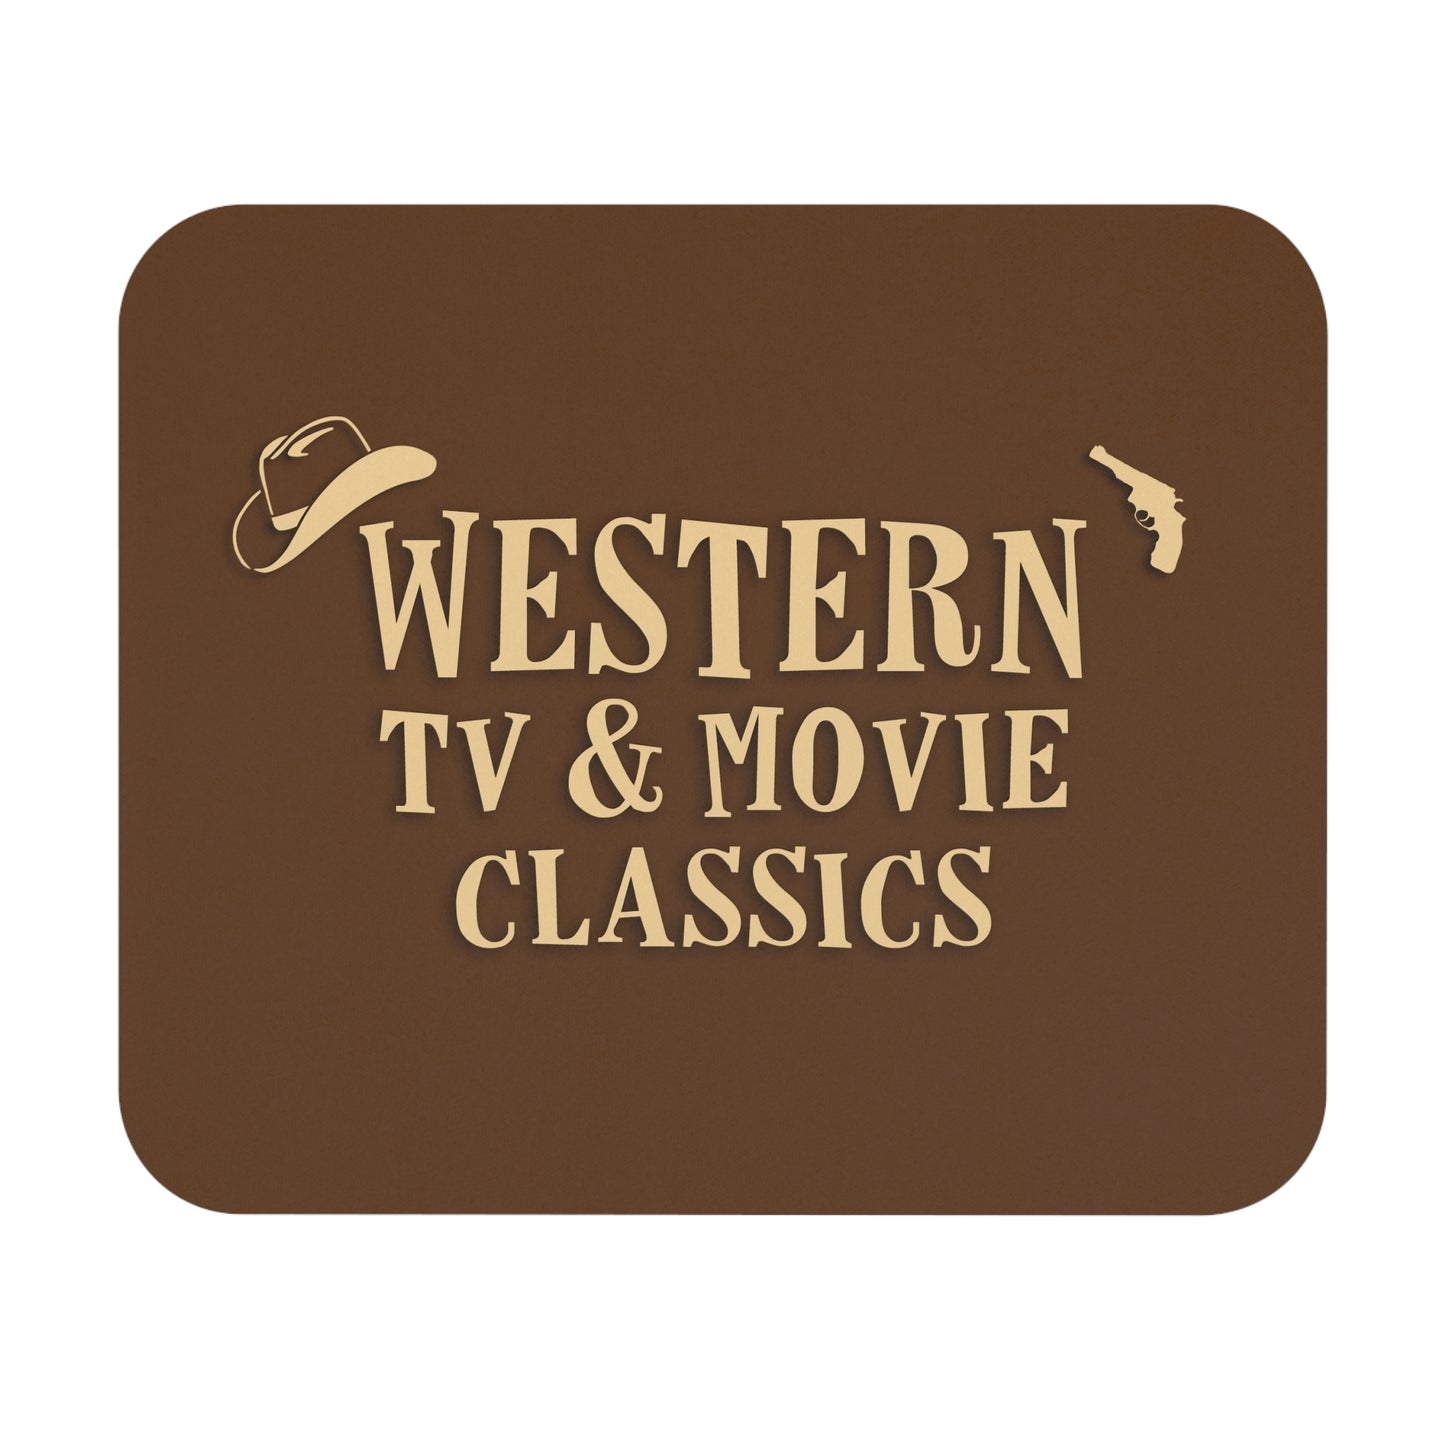 Western TV & Movie Classics -  Mouse Pad (Rectangle)